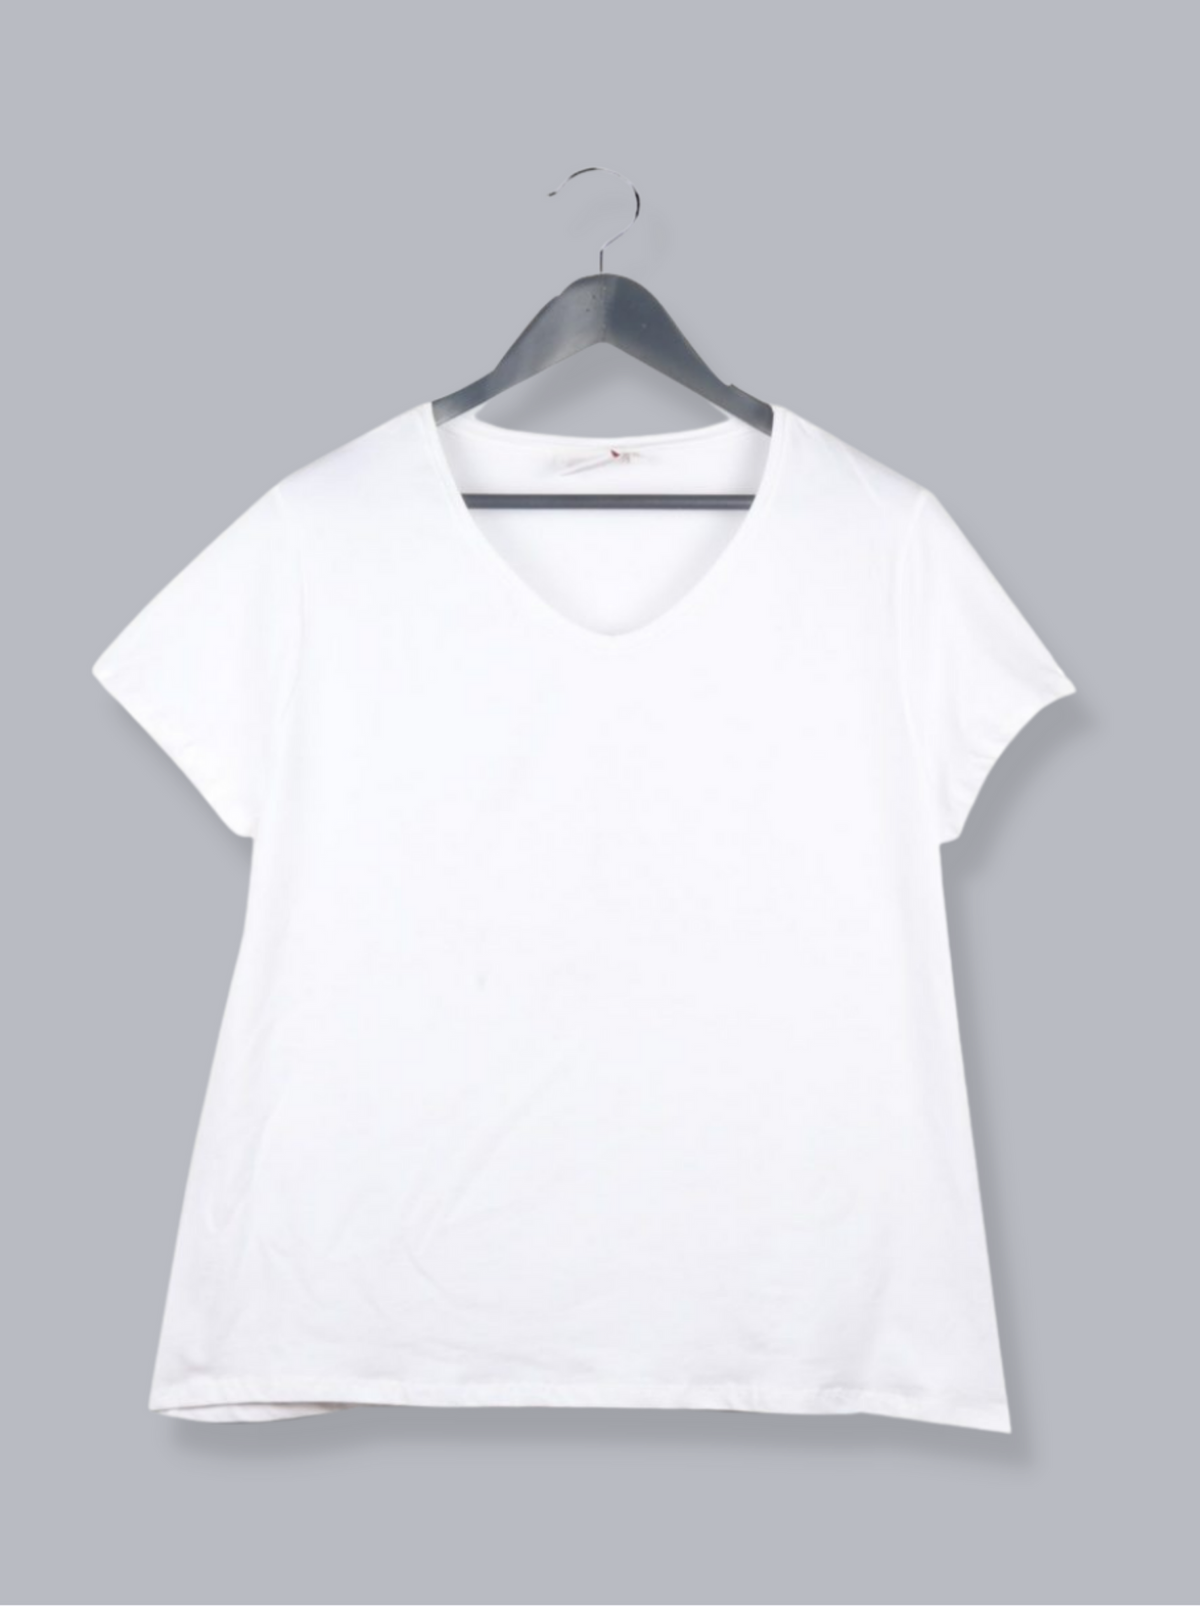 Mens White Half sleeve Solid Single Jersey T-shirt